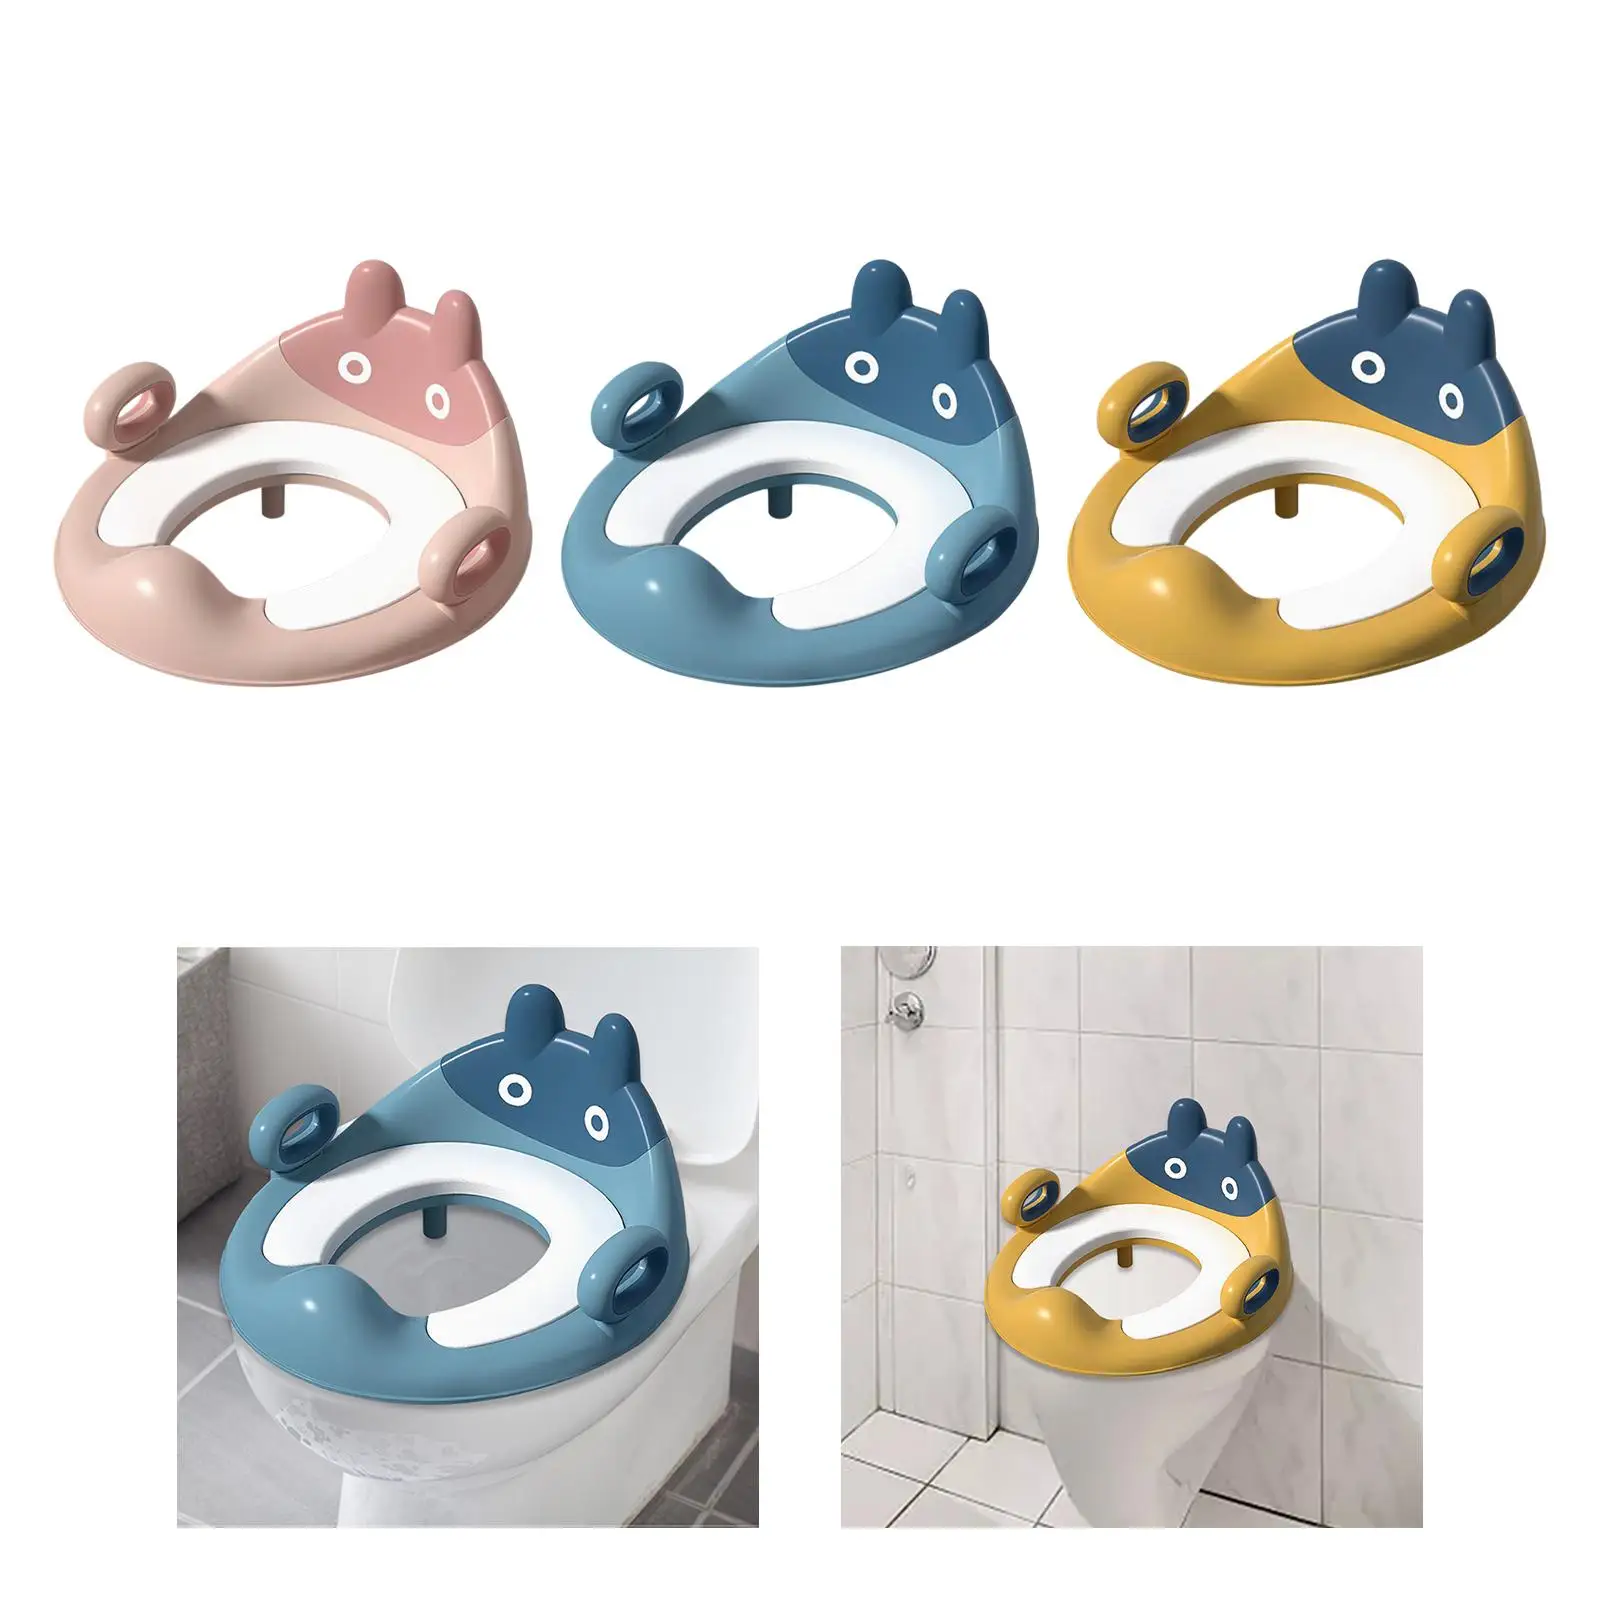 Potty Trainings Seat Fits Most Toilets Potty Seat for Boy and Girl Child Kids